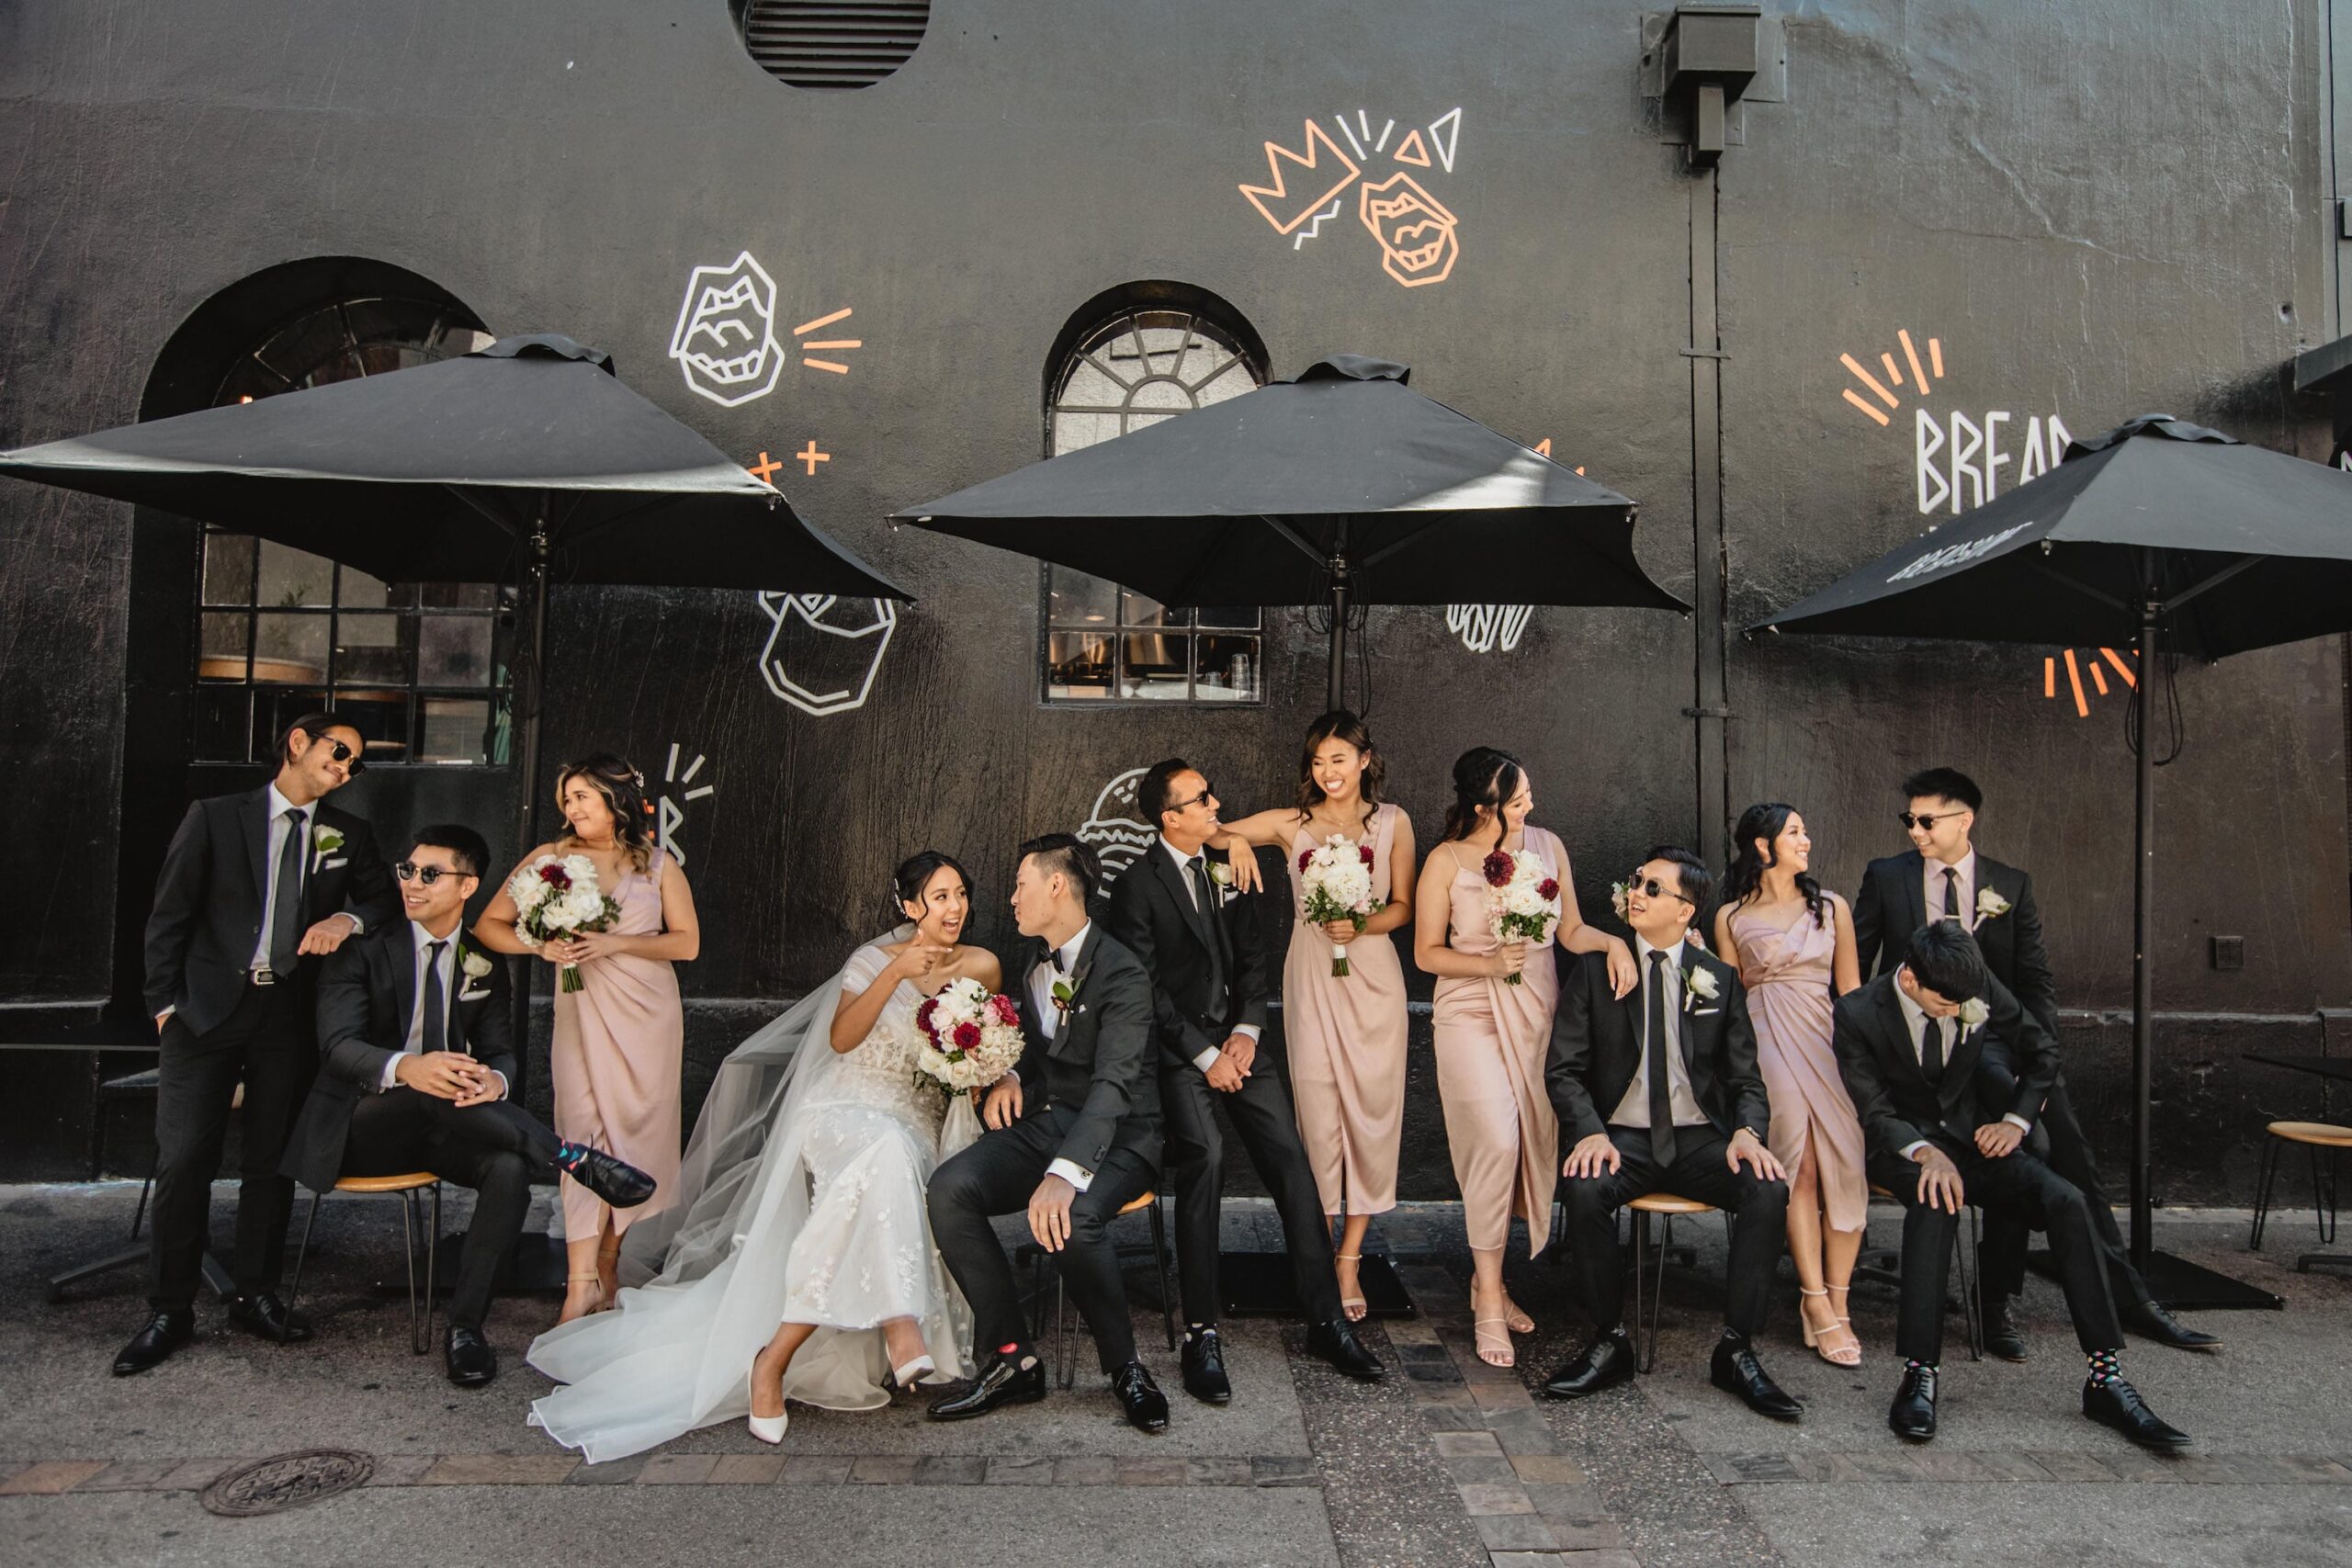 Calèche Real Bride Anita & Terence - bridal party siting and standing outside restaurant wall in city laneway